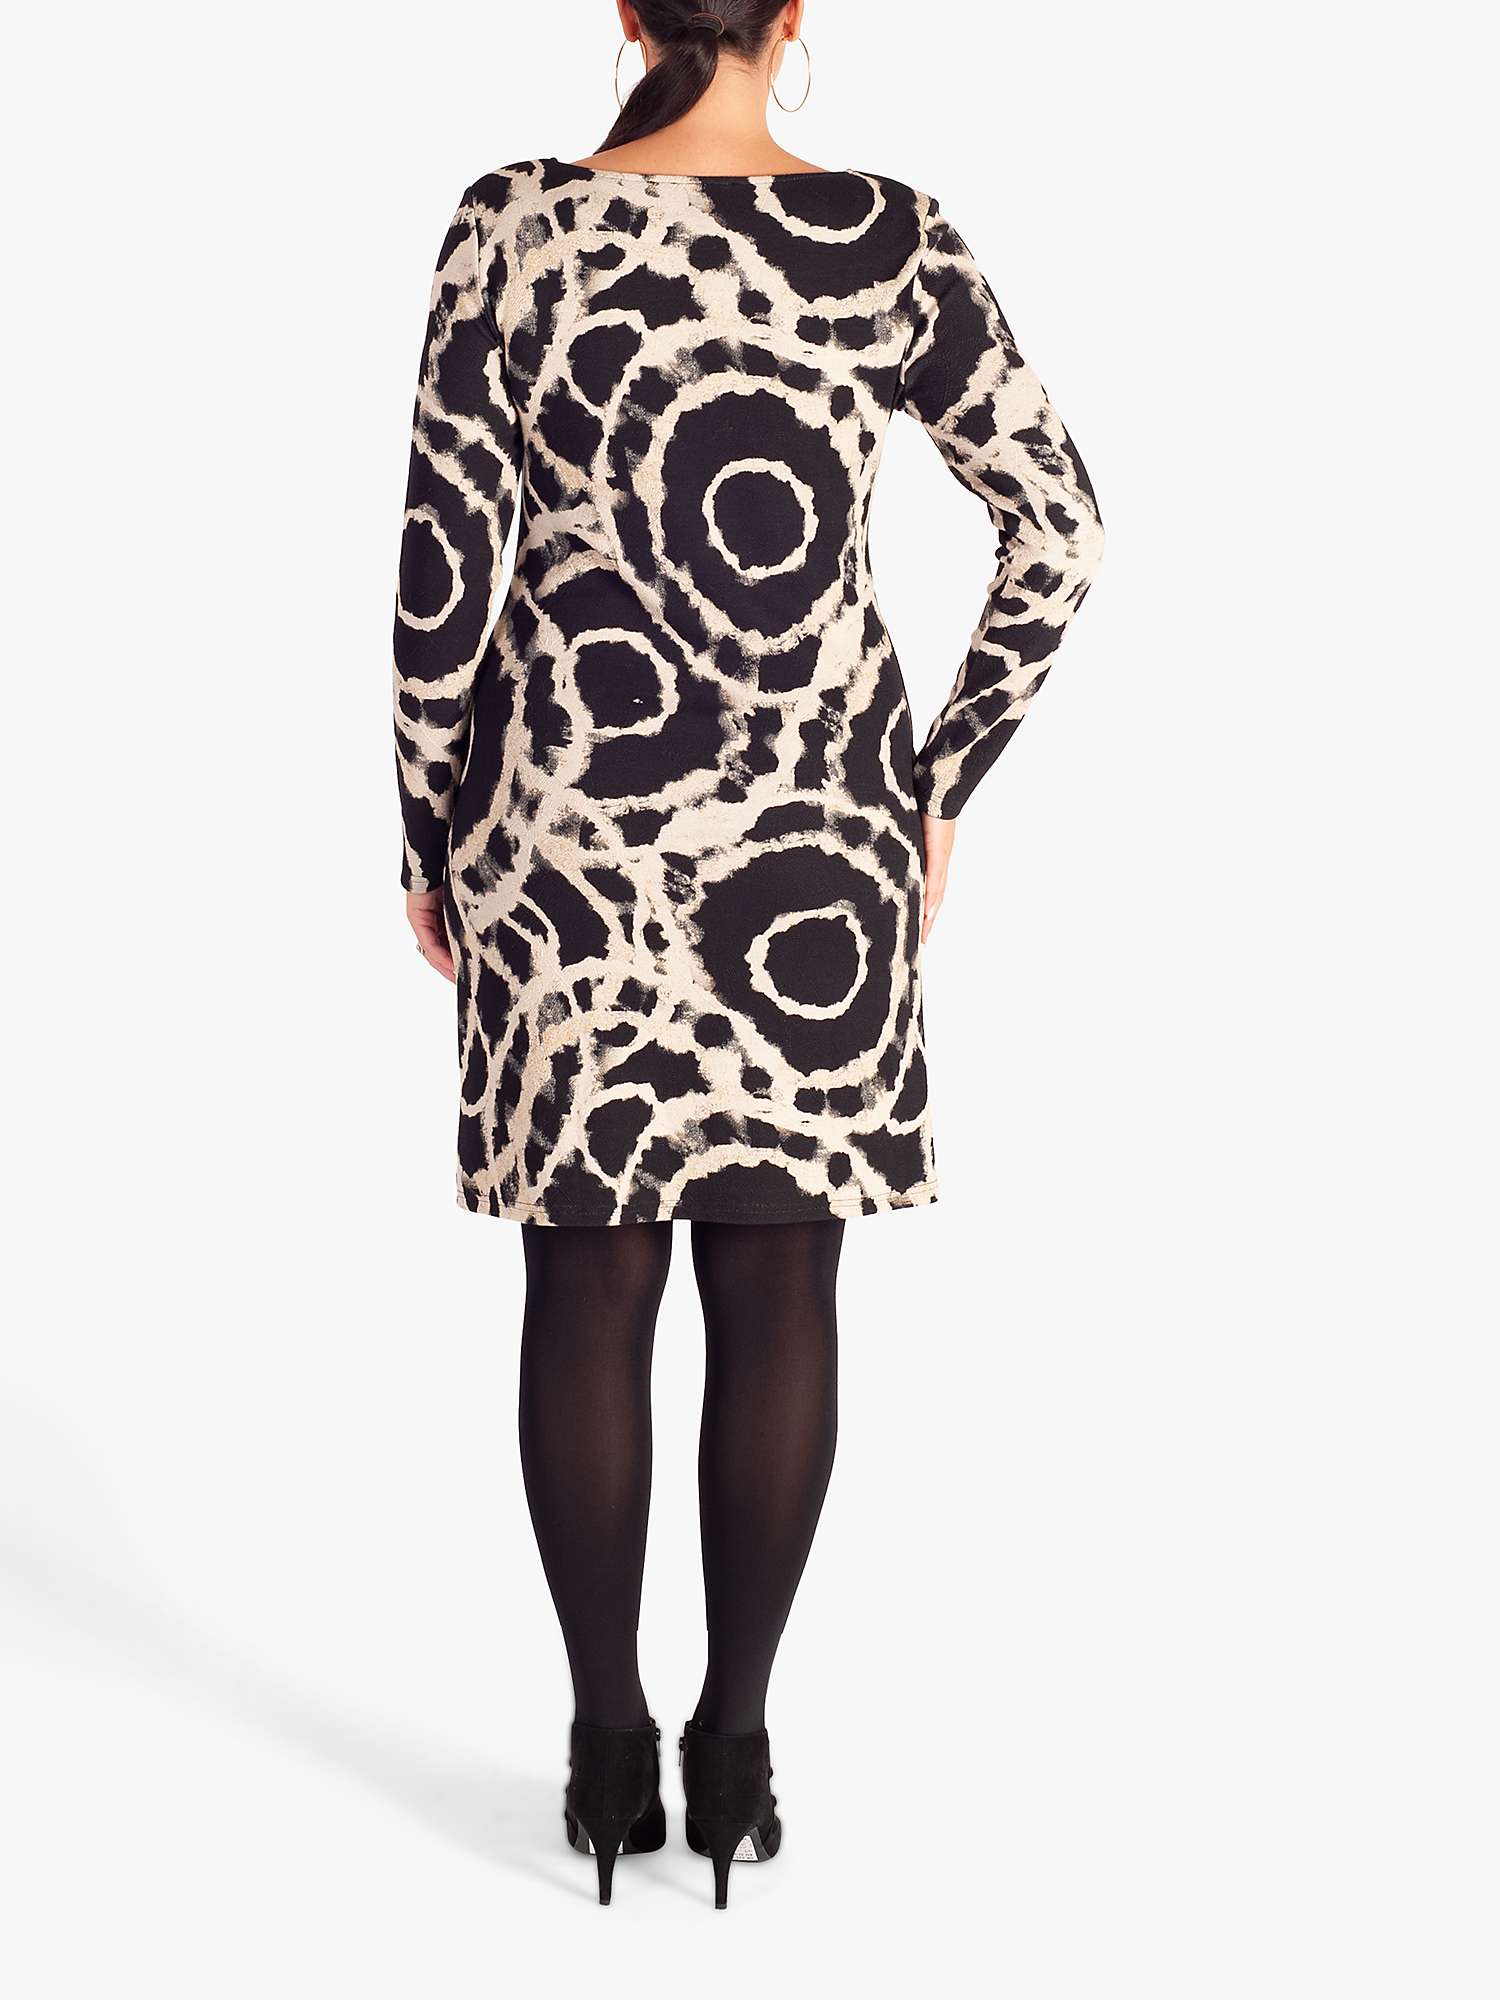 Buy chesca Crepe Abstract Circles Print Mini Dress, Black/Beige Online at johnlewis.com